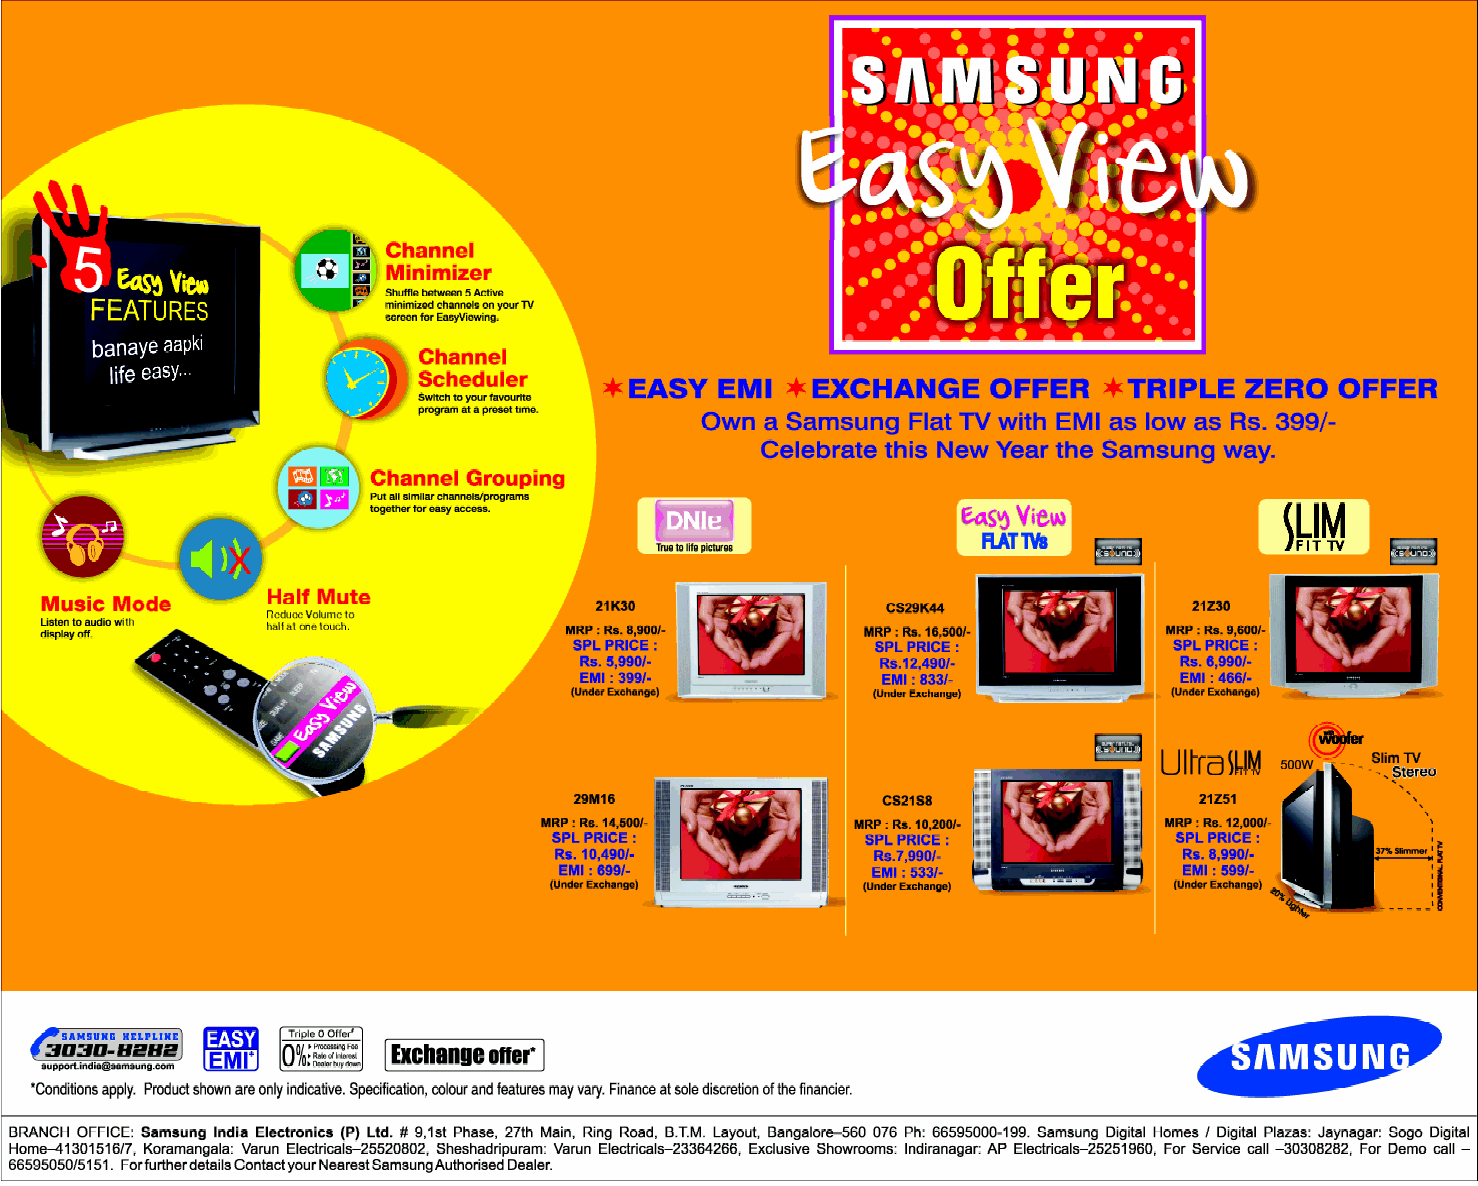 Samsung - Easy View Offer